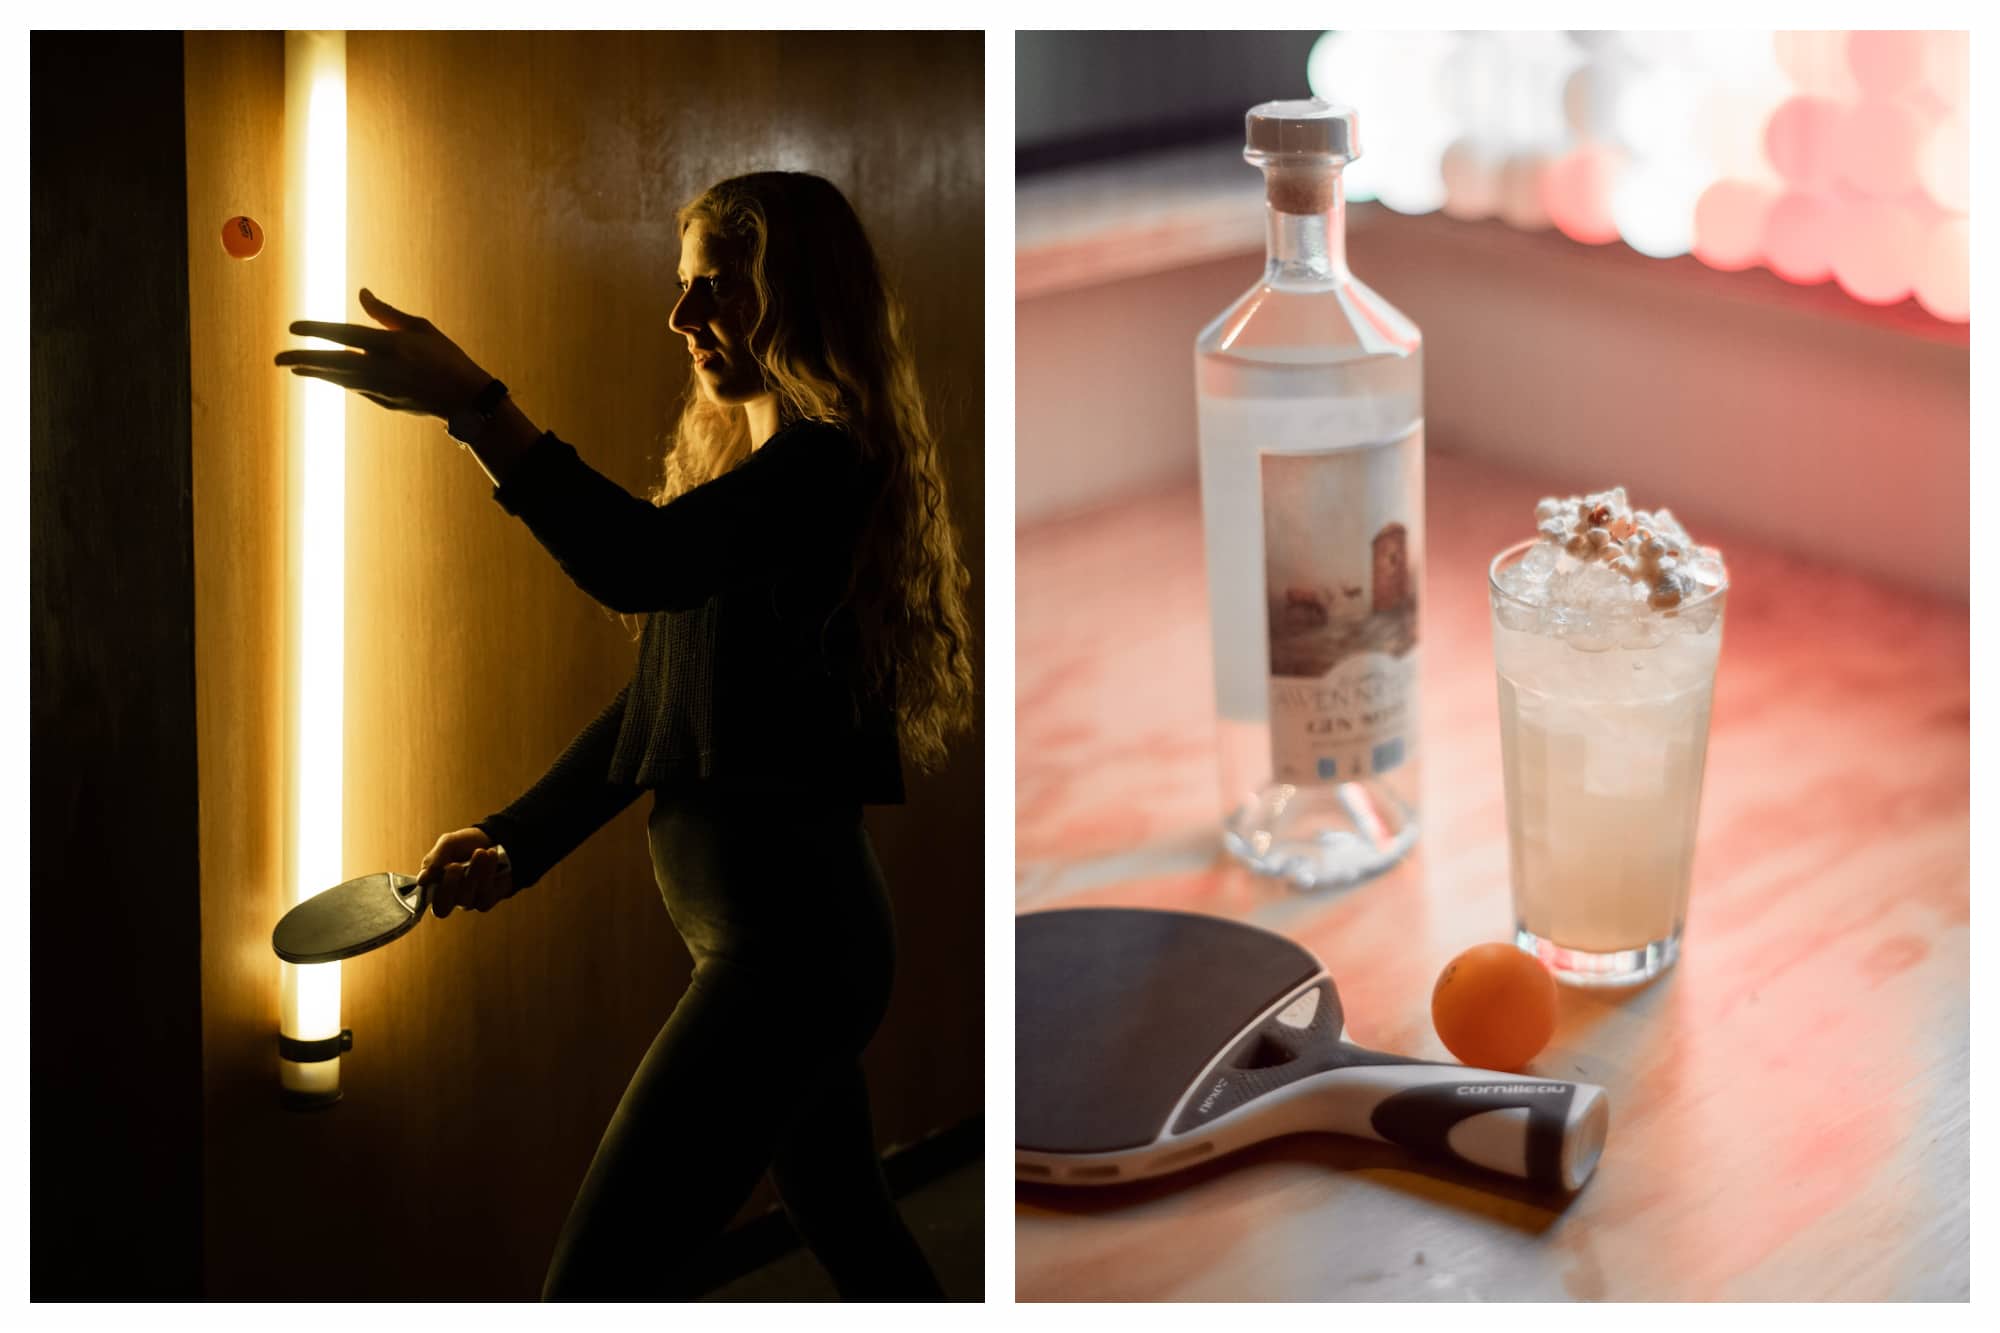 On left: A ping-pong player readies her serve in the dim light of Gossima Ping Pong Bar. On right: Gossima Ping Pong Bar, in Paris' 11th arrondissement, serves up shareable bar food and drinks that you can enjoy in between sets. 